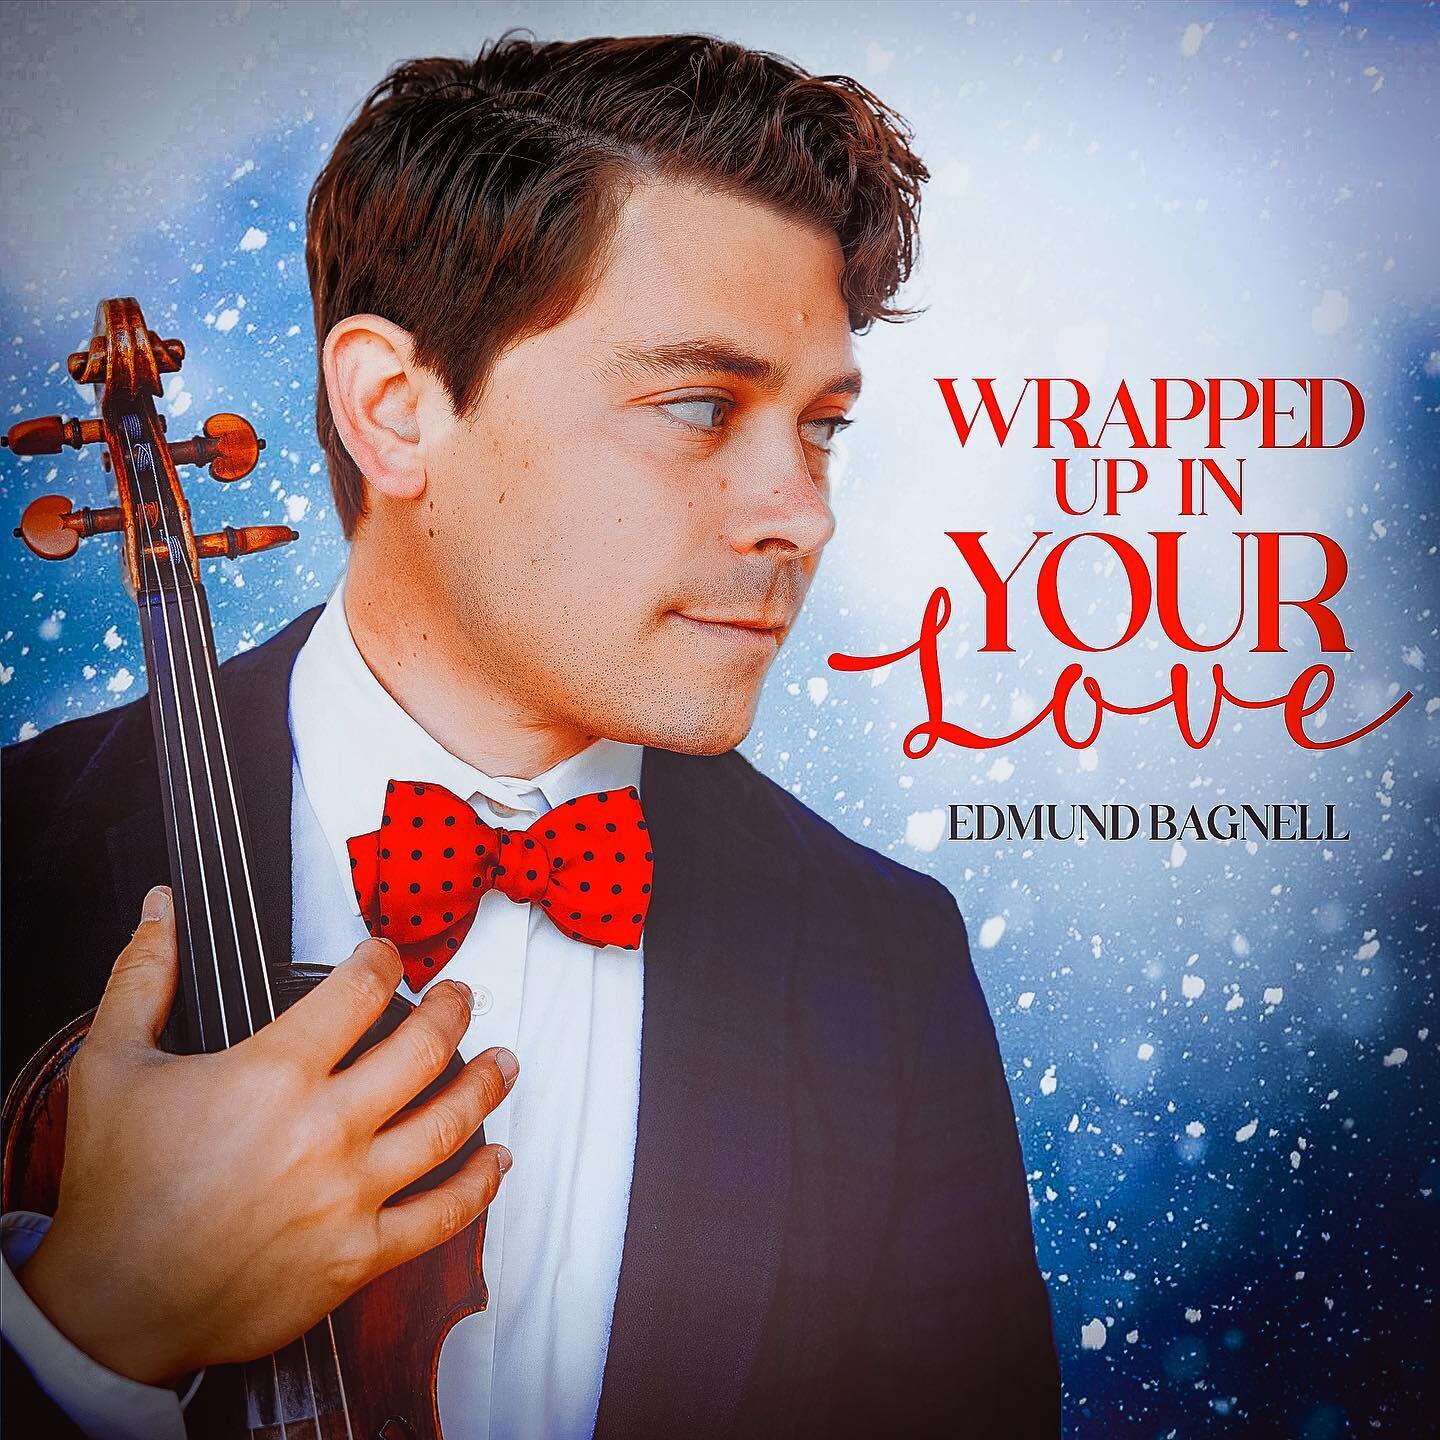 Wrapped Up In Your Love is *LIVE*
Follow the link in bio to listen on your preferred platform!!!!

#wrappedupinyourlove #christmasmusic #holidaymusic #newmusic #singersongwriter #christmas22 #violinist
#originalsong